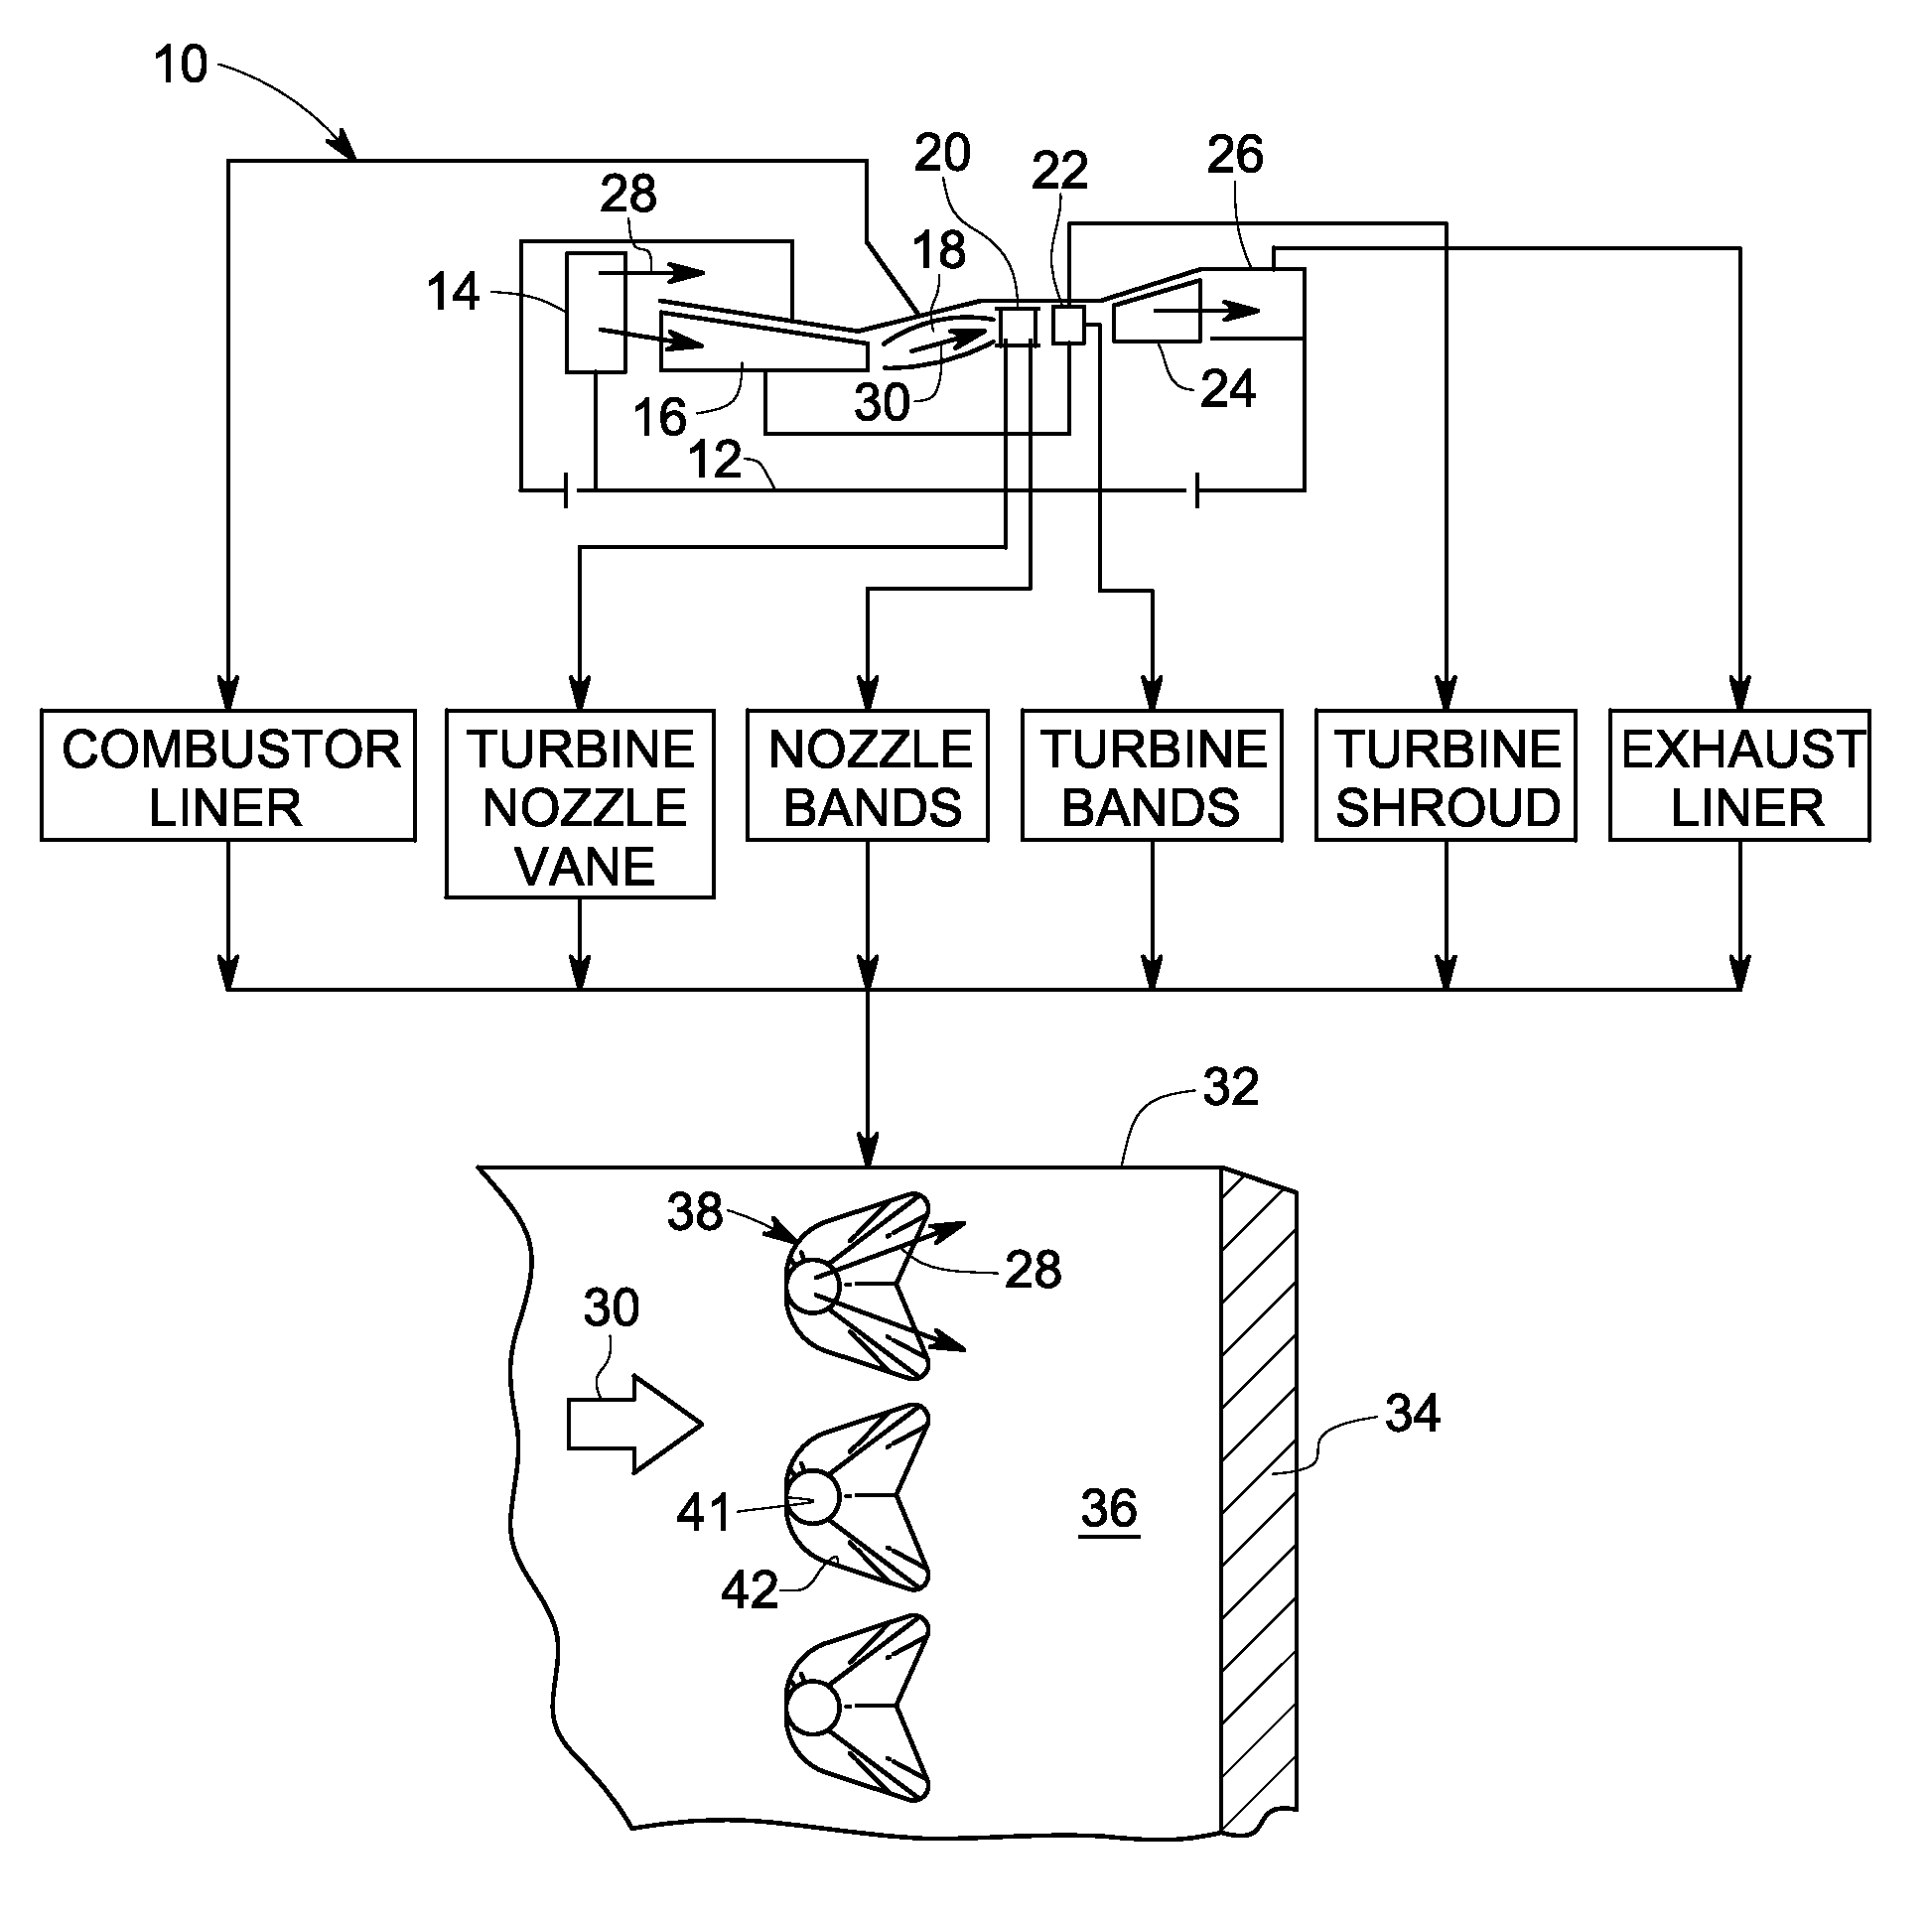 System and method for improved film cooling